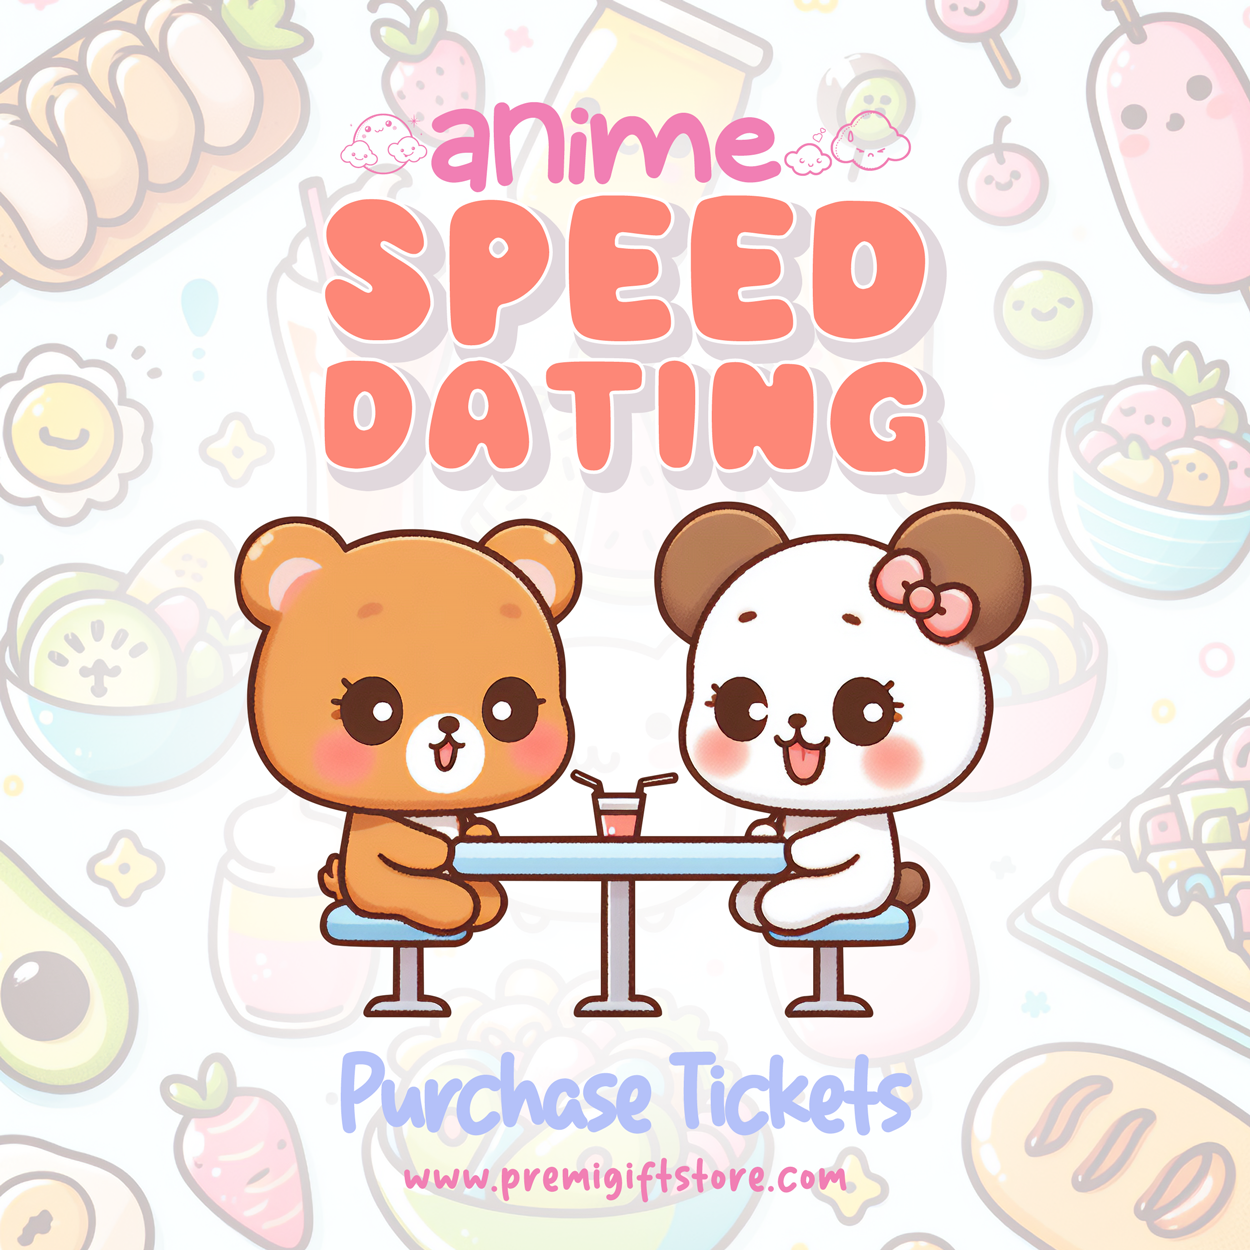 Anime Speed Dating Tickets